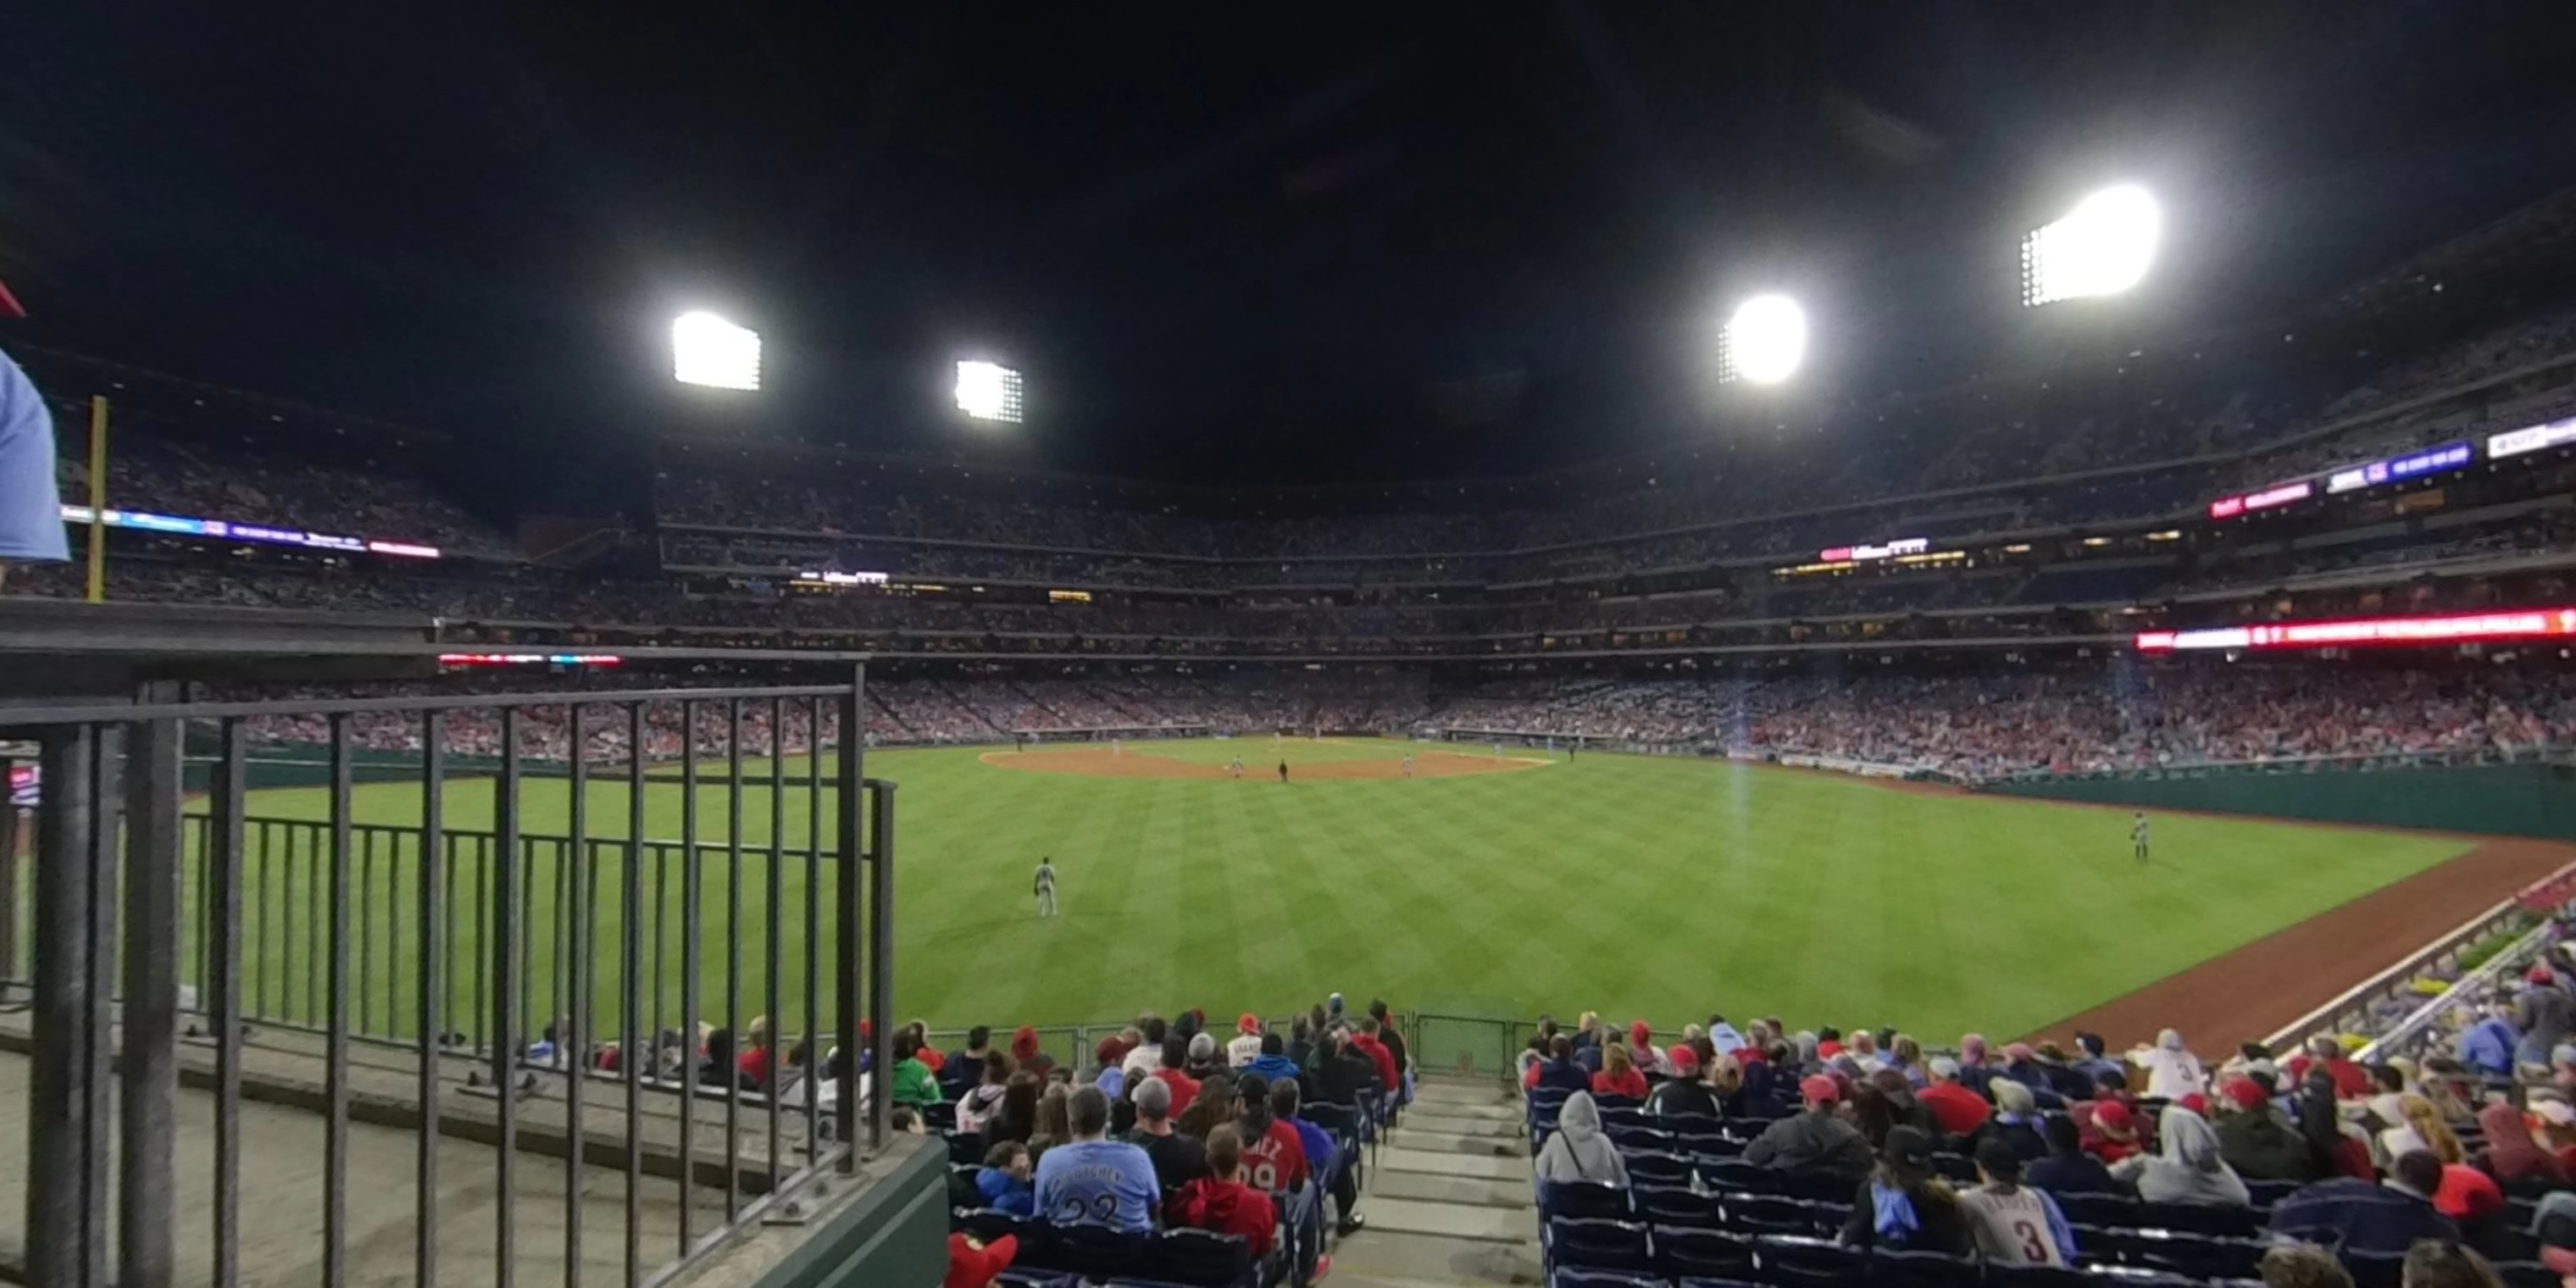 section 147 panoramic seat view  for baseball - citizens bank park